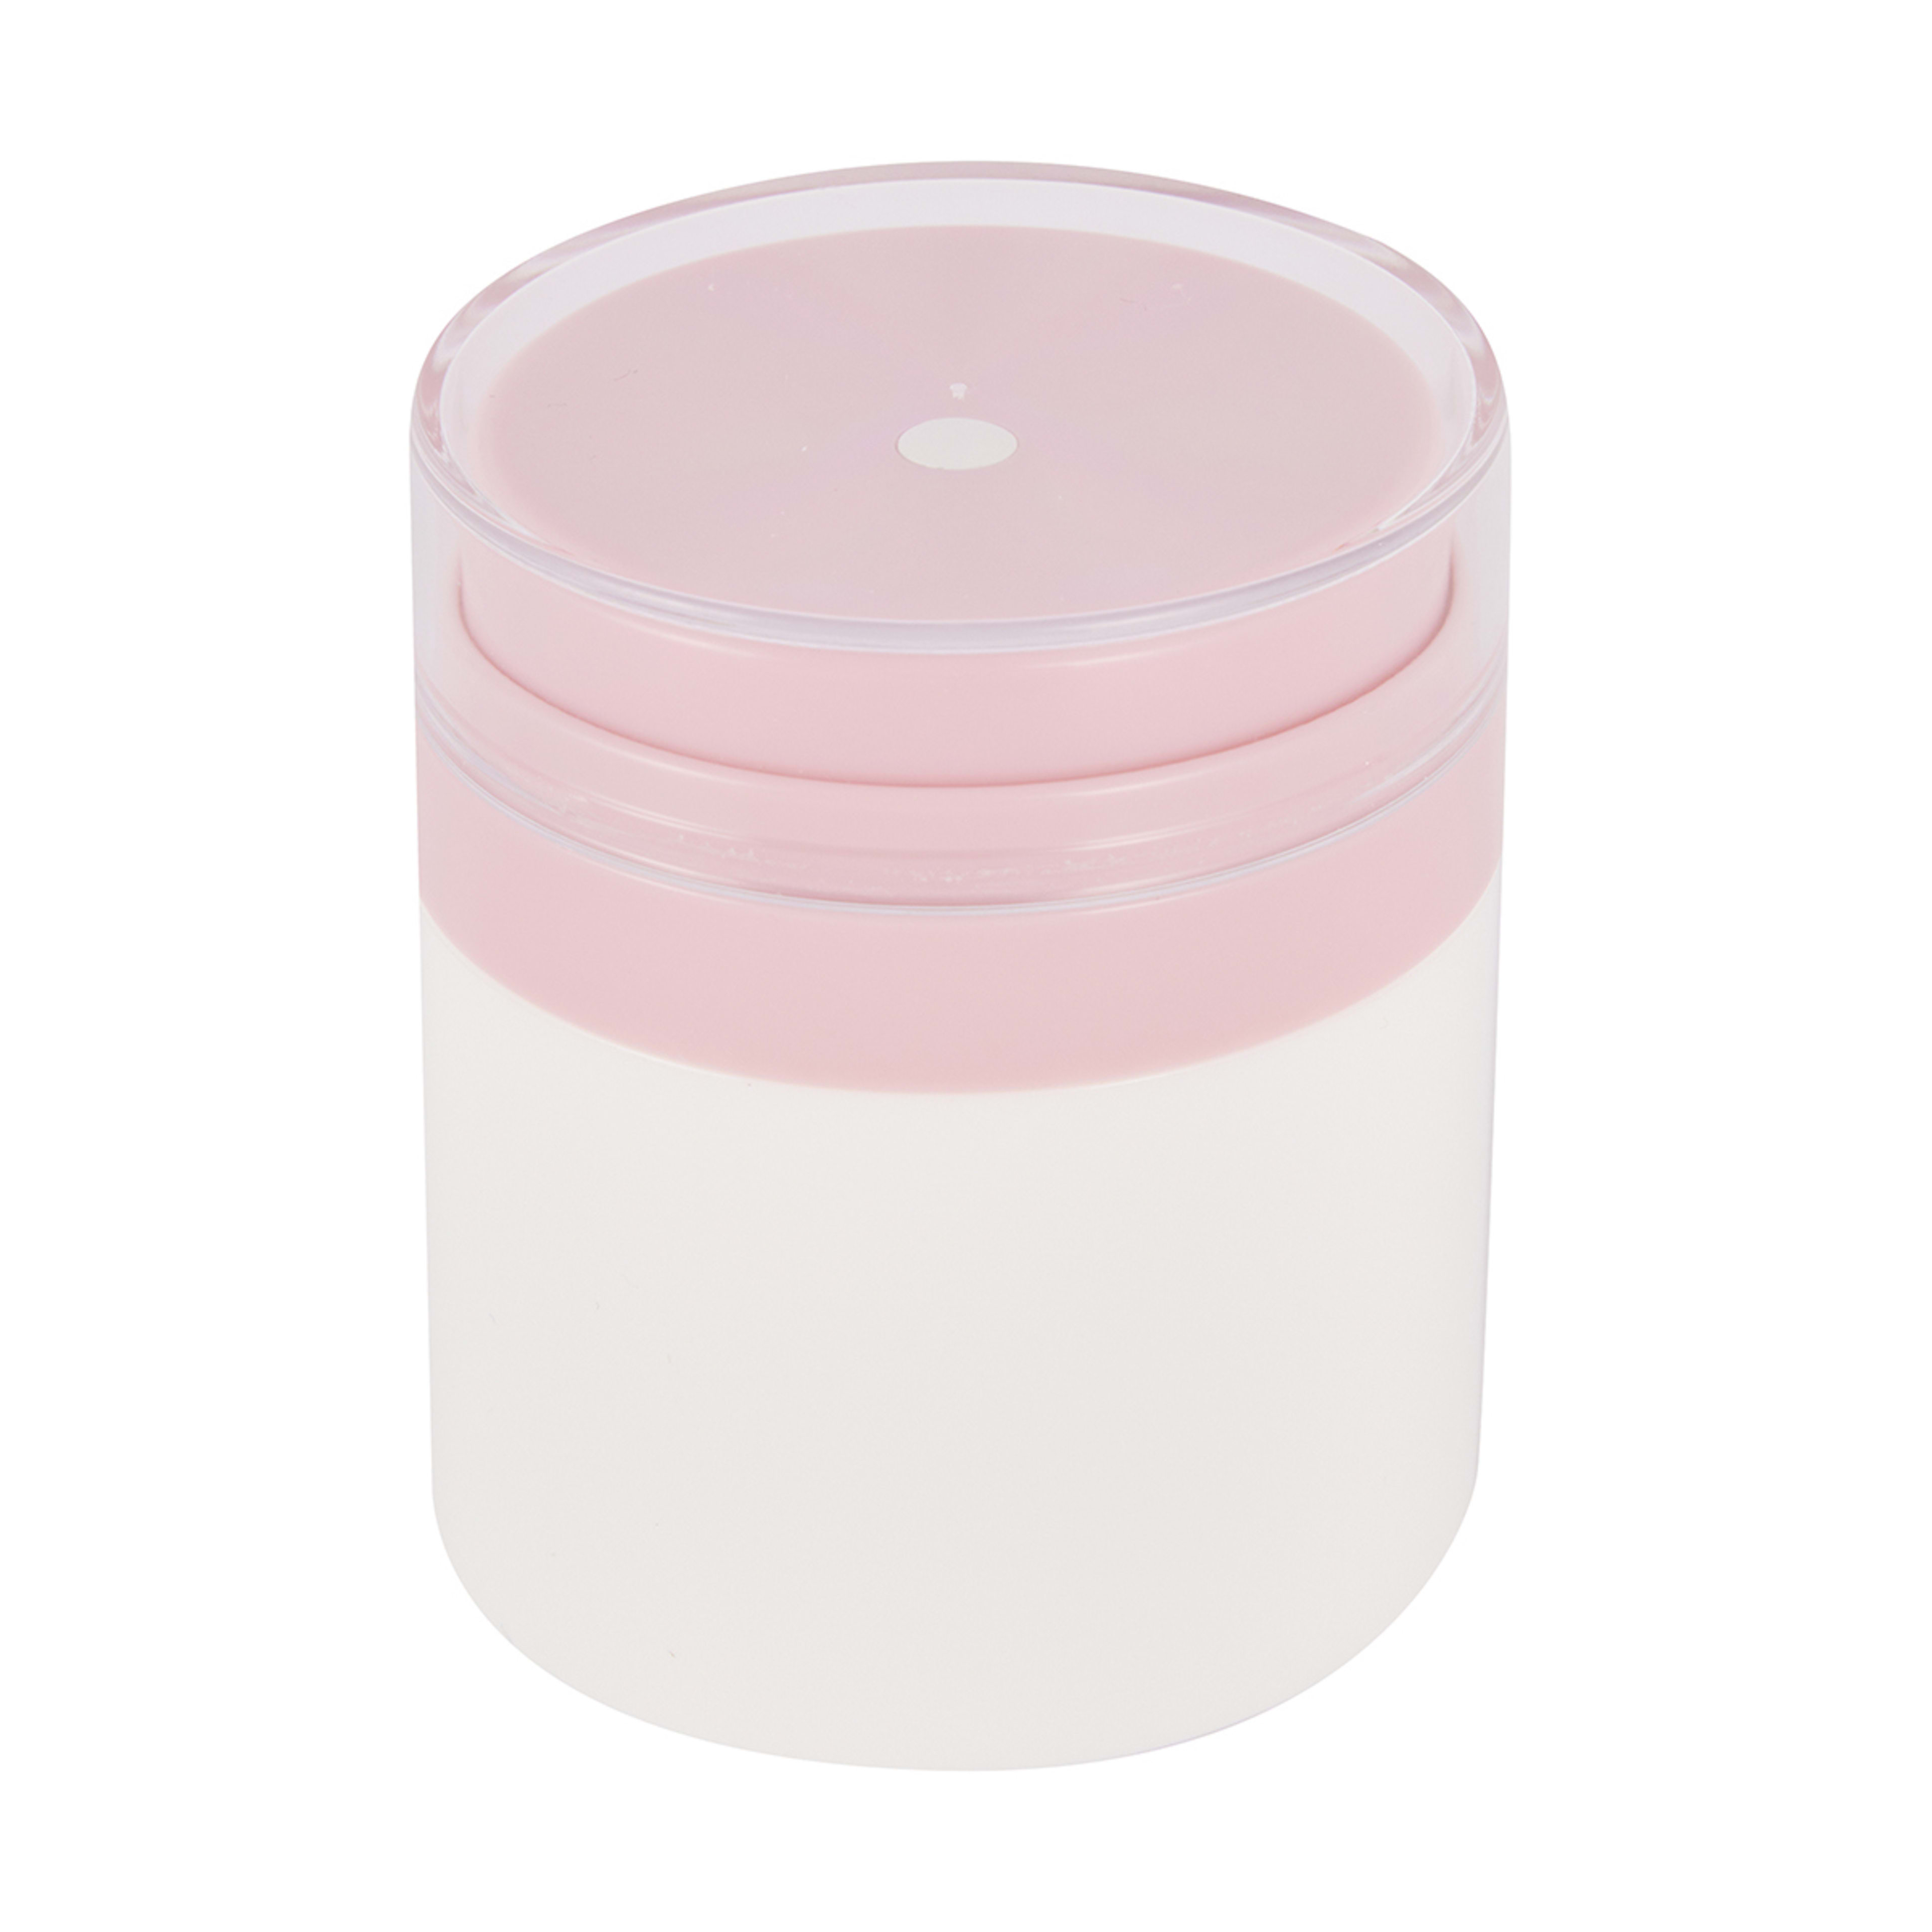 Travel Solutions Airless Pump Container - Kmart